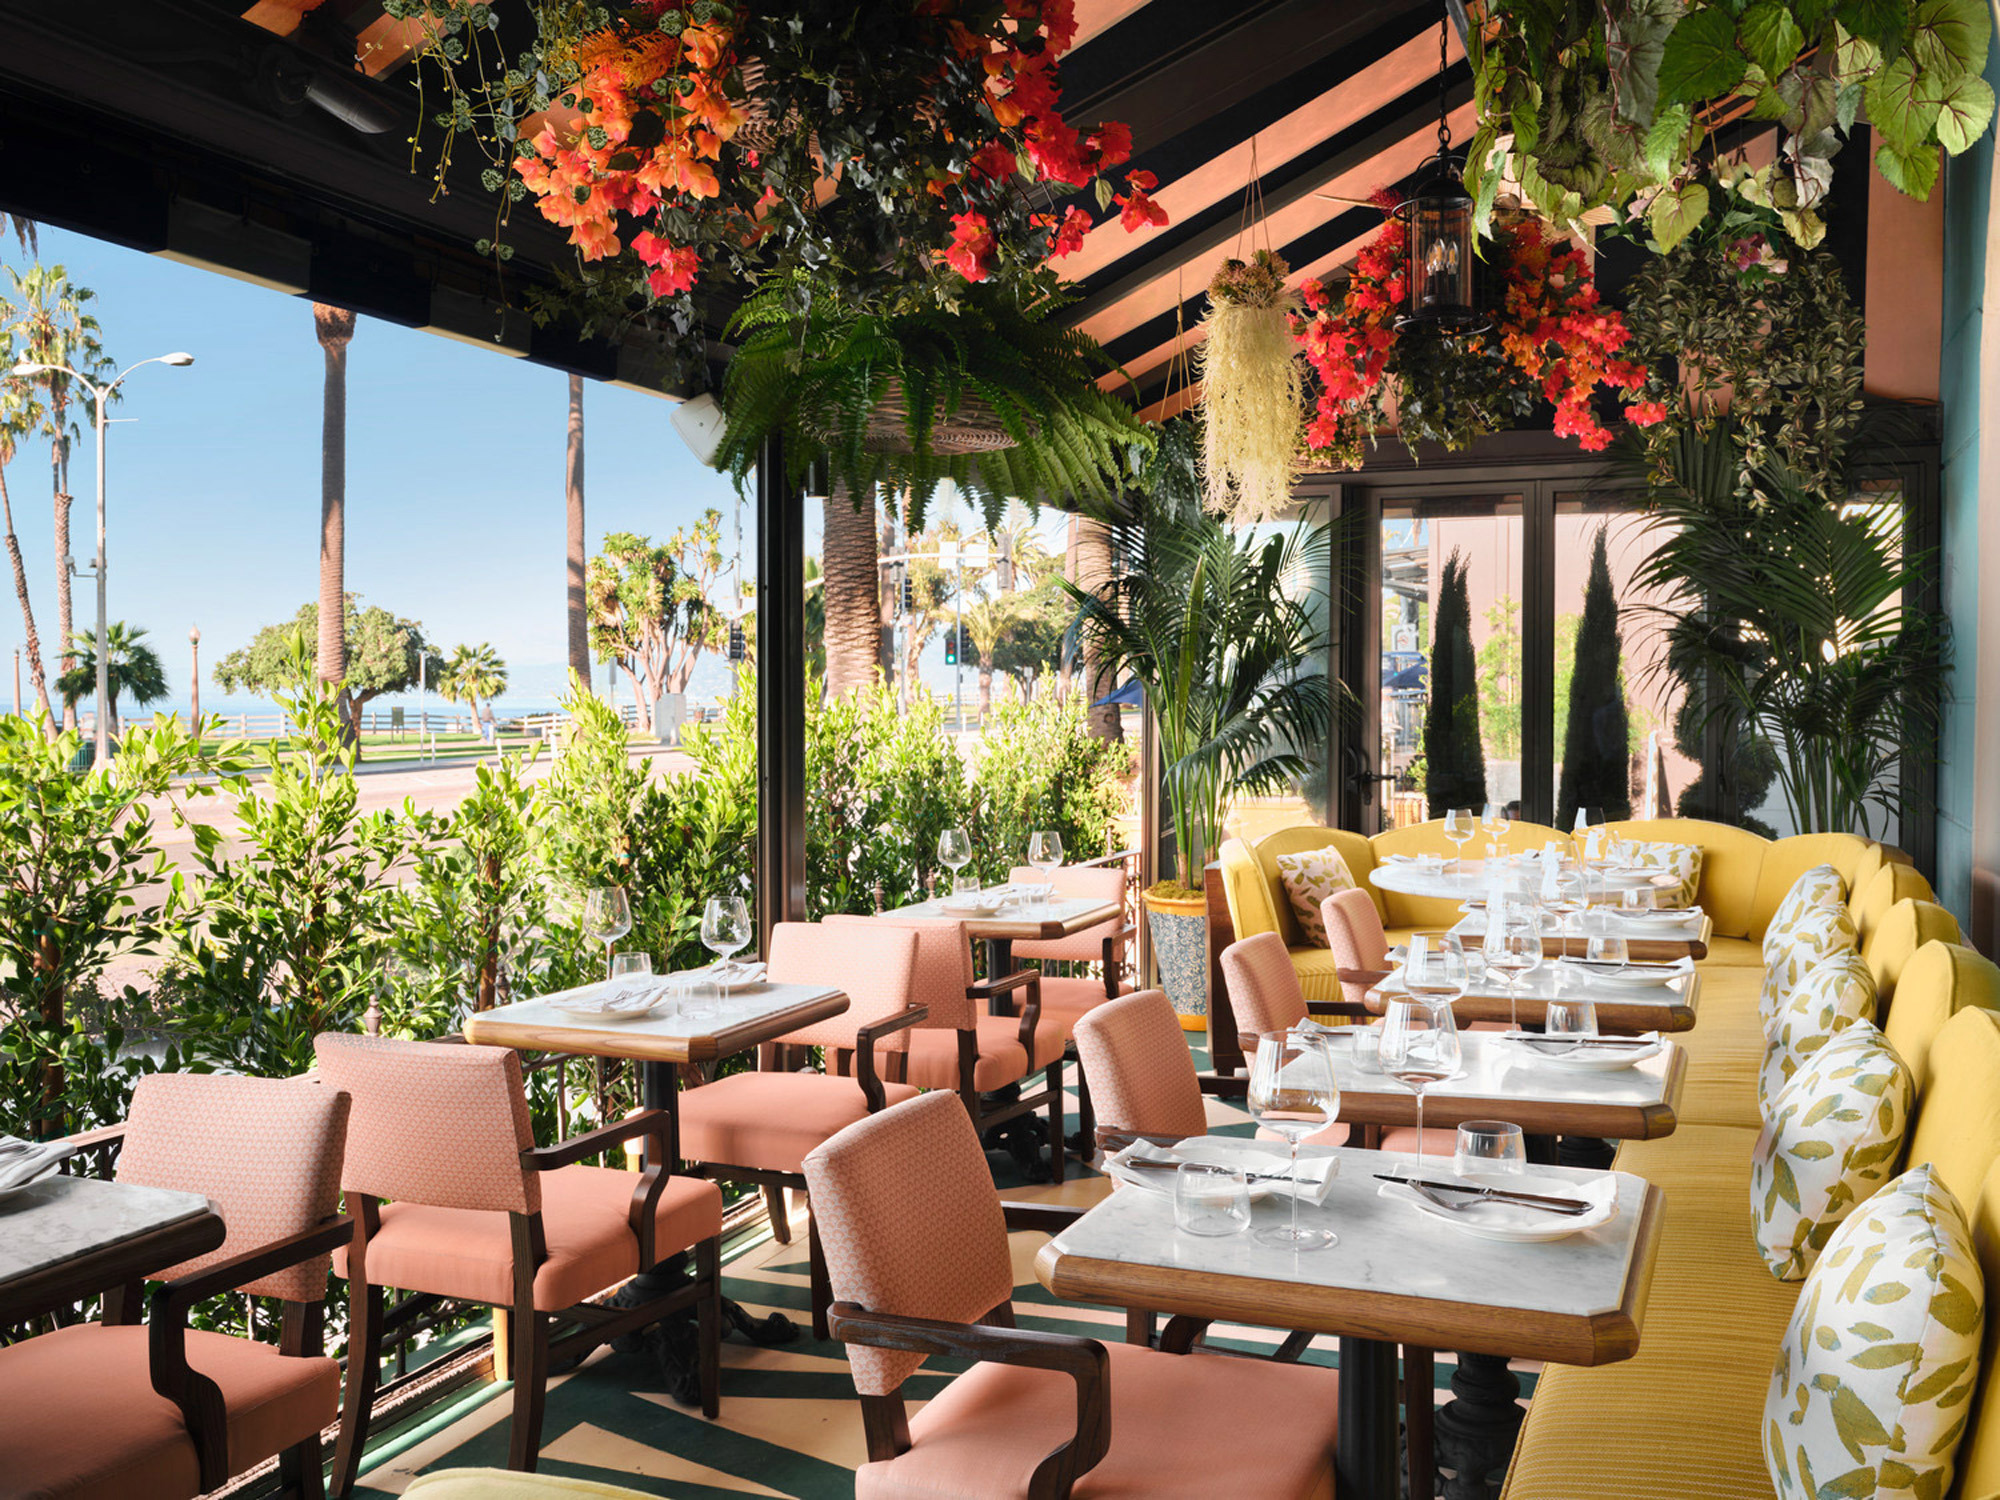 Open-air restaurant with a vibrant floral canopy, integrating nature with dining. Warm wood tones and pink chairs contrast against yellow banquette seating, capturing a breezy, coastal elegance. Ocean views complement the botanical ambiance, celebrating a seamless indoor-outdoor experience.